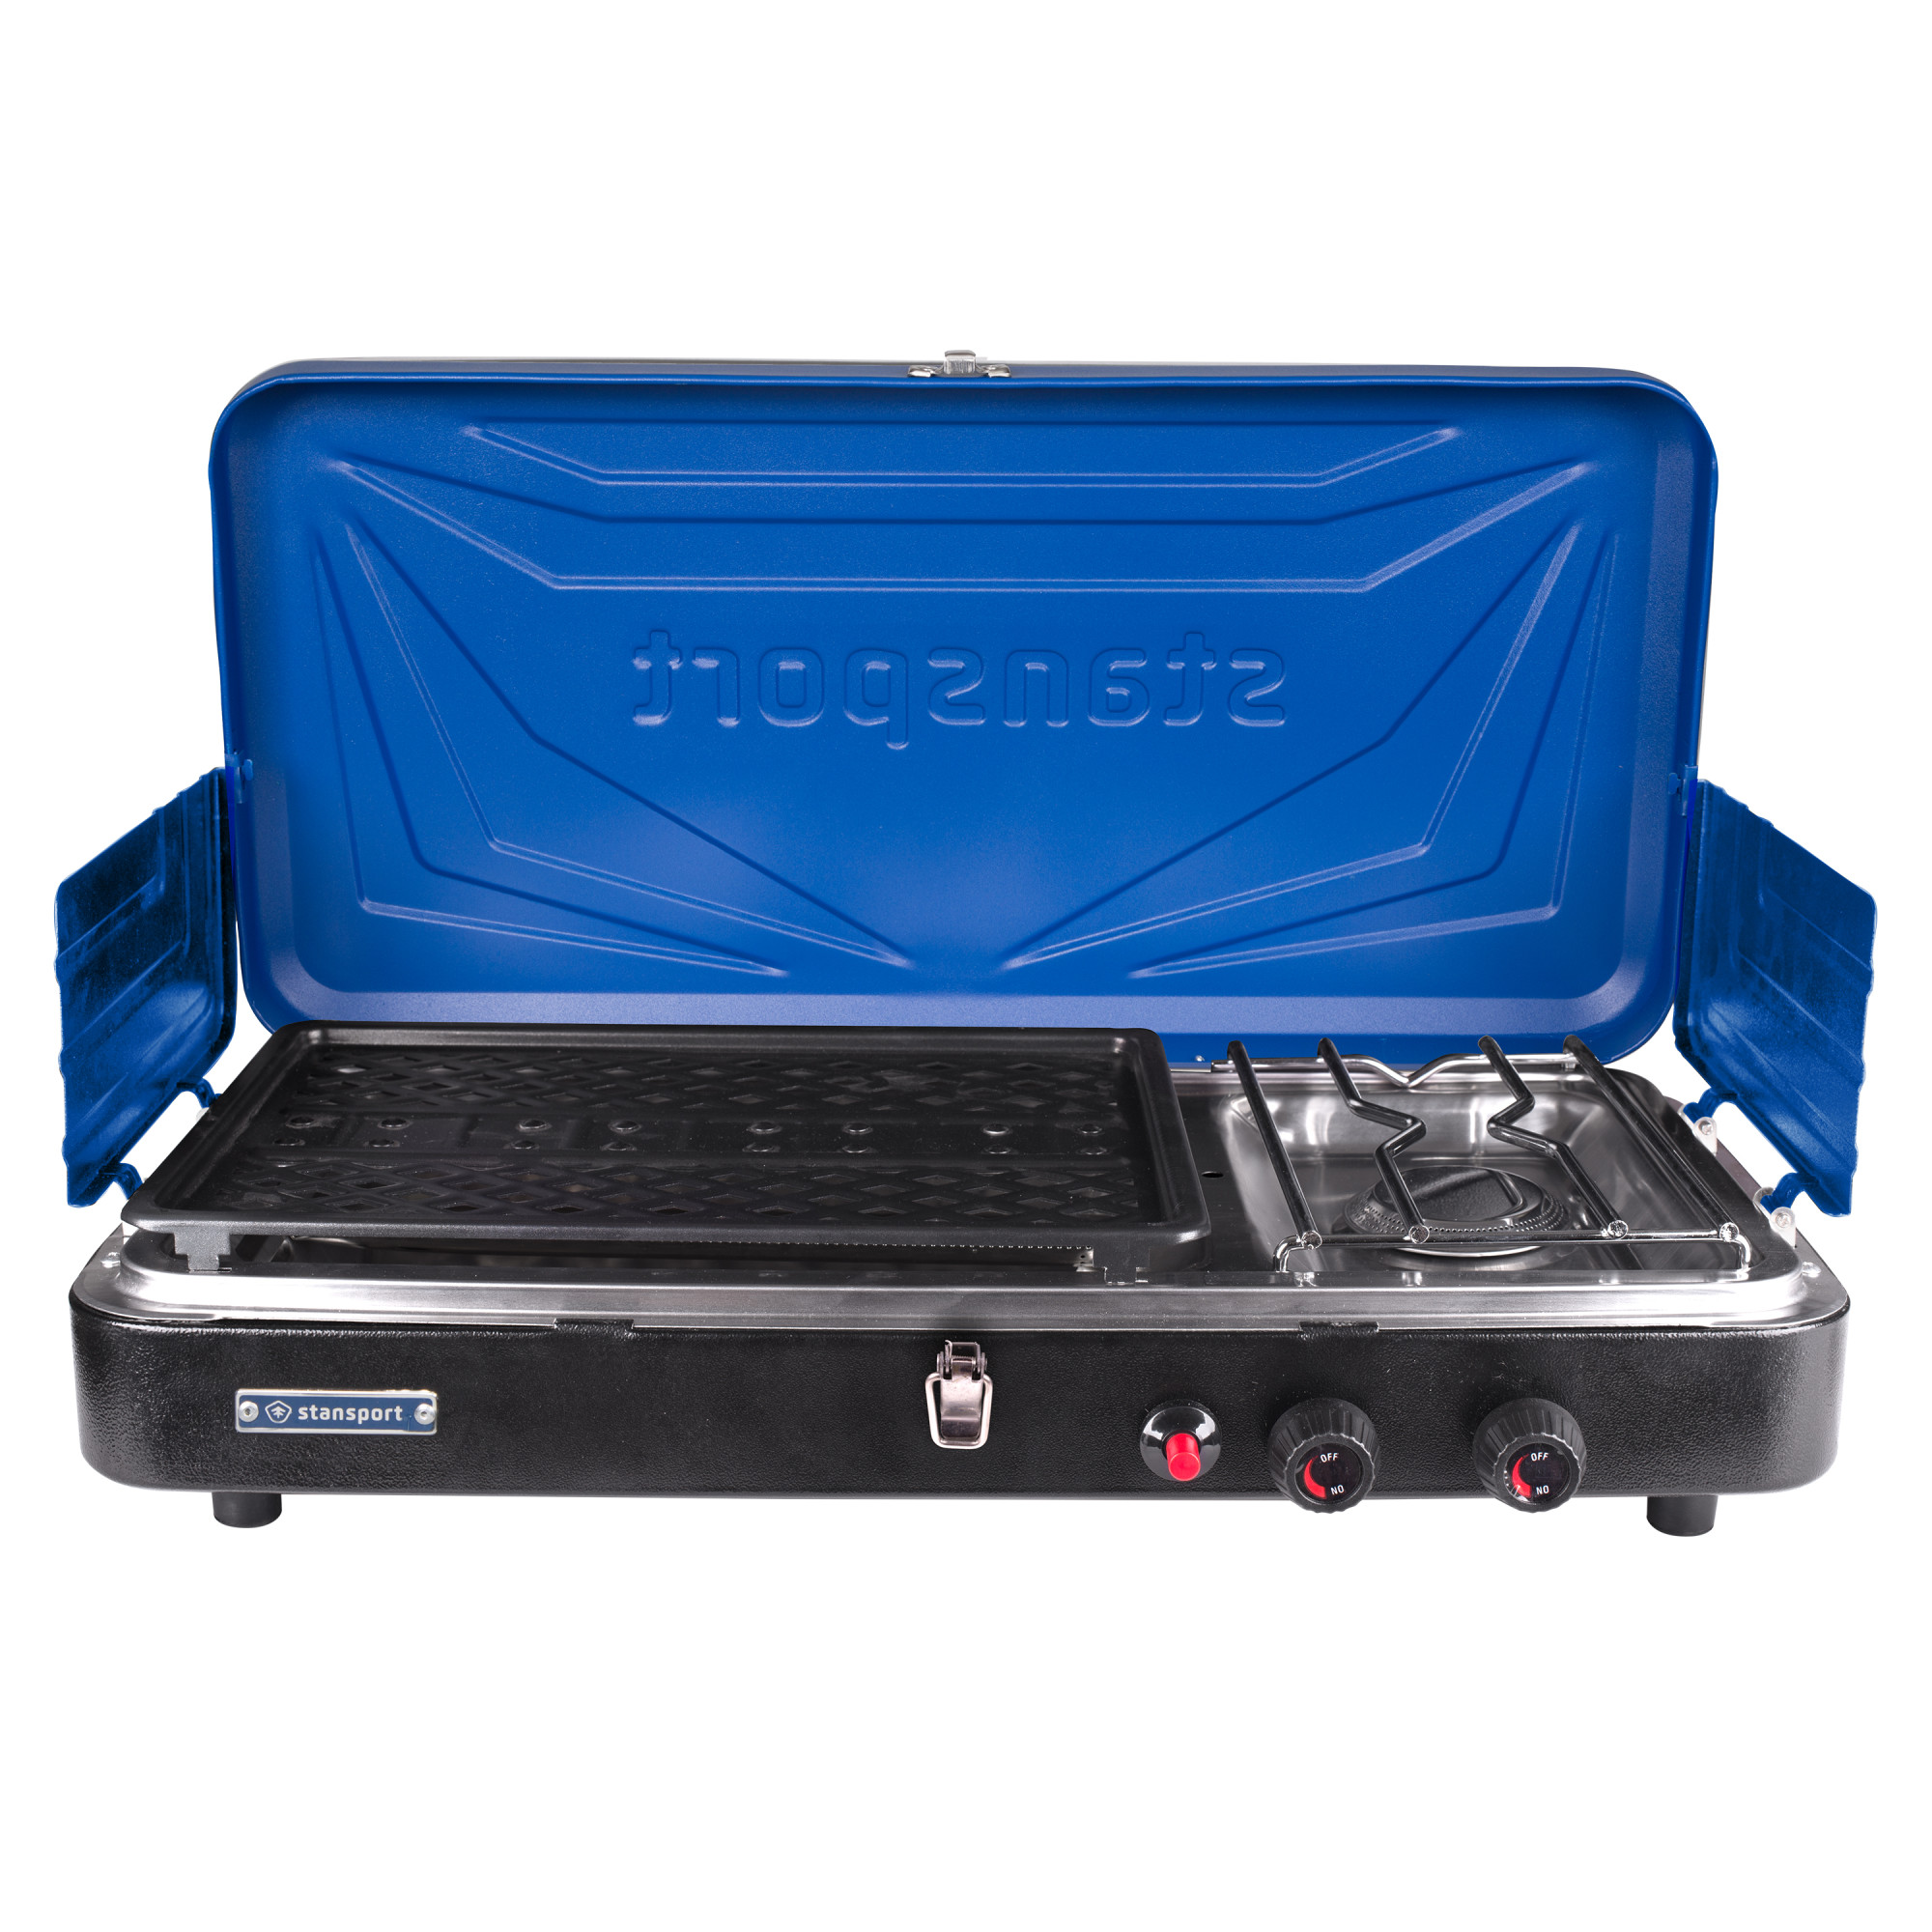 Stansport Propane Stove and Grill Combo Blue 206-50 - image 1 of 8